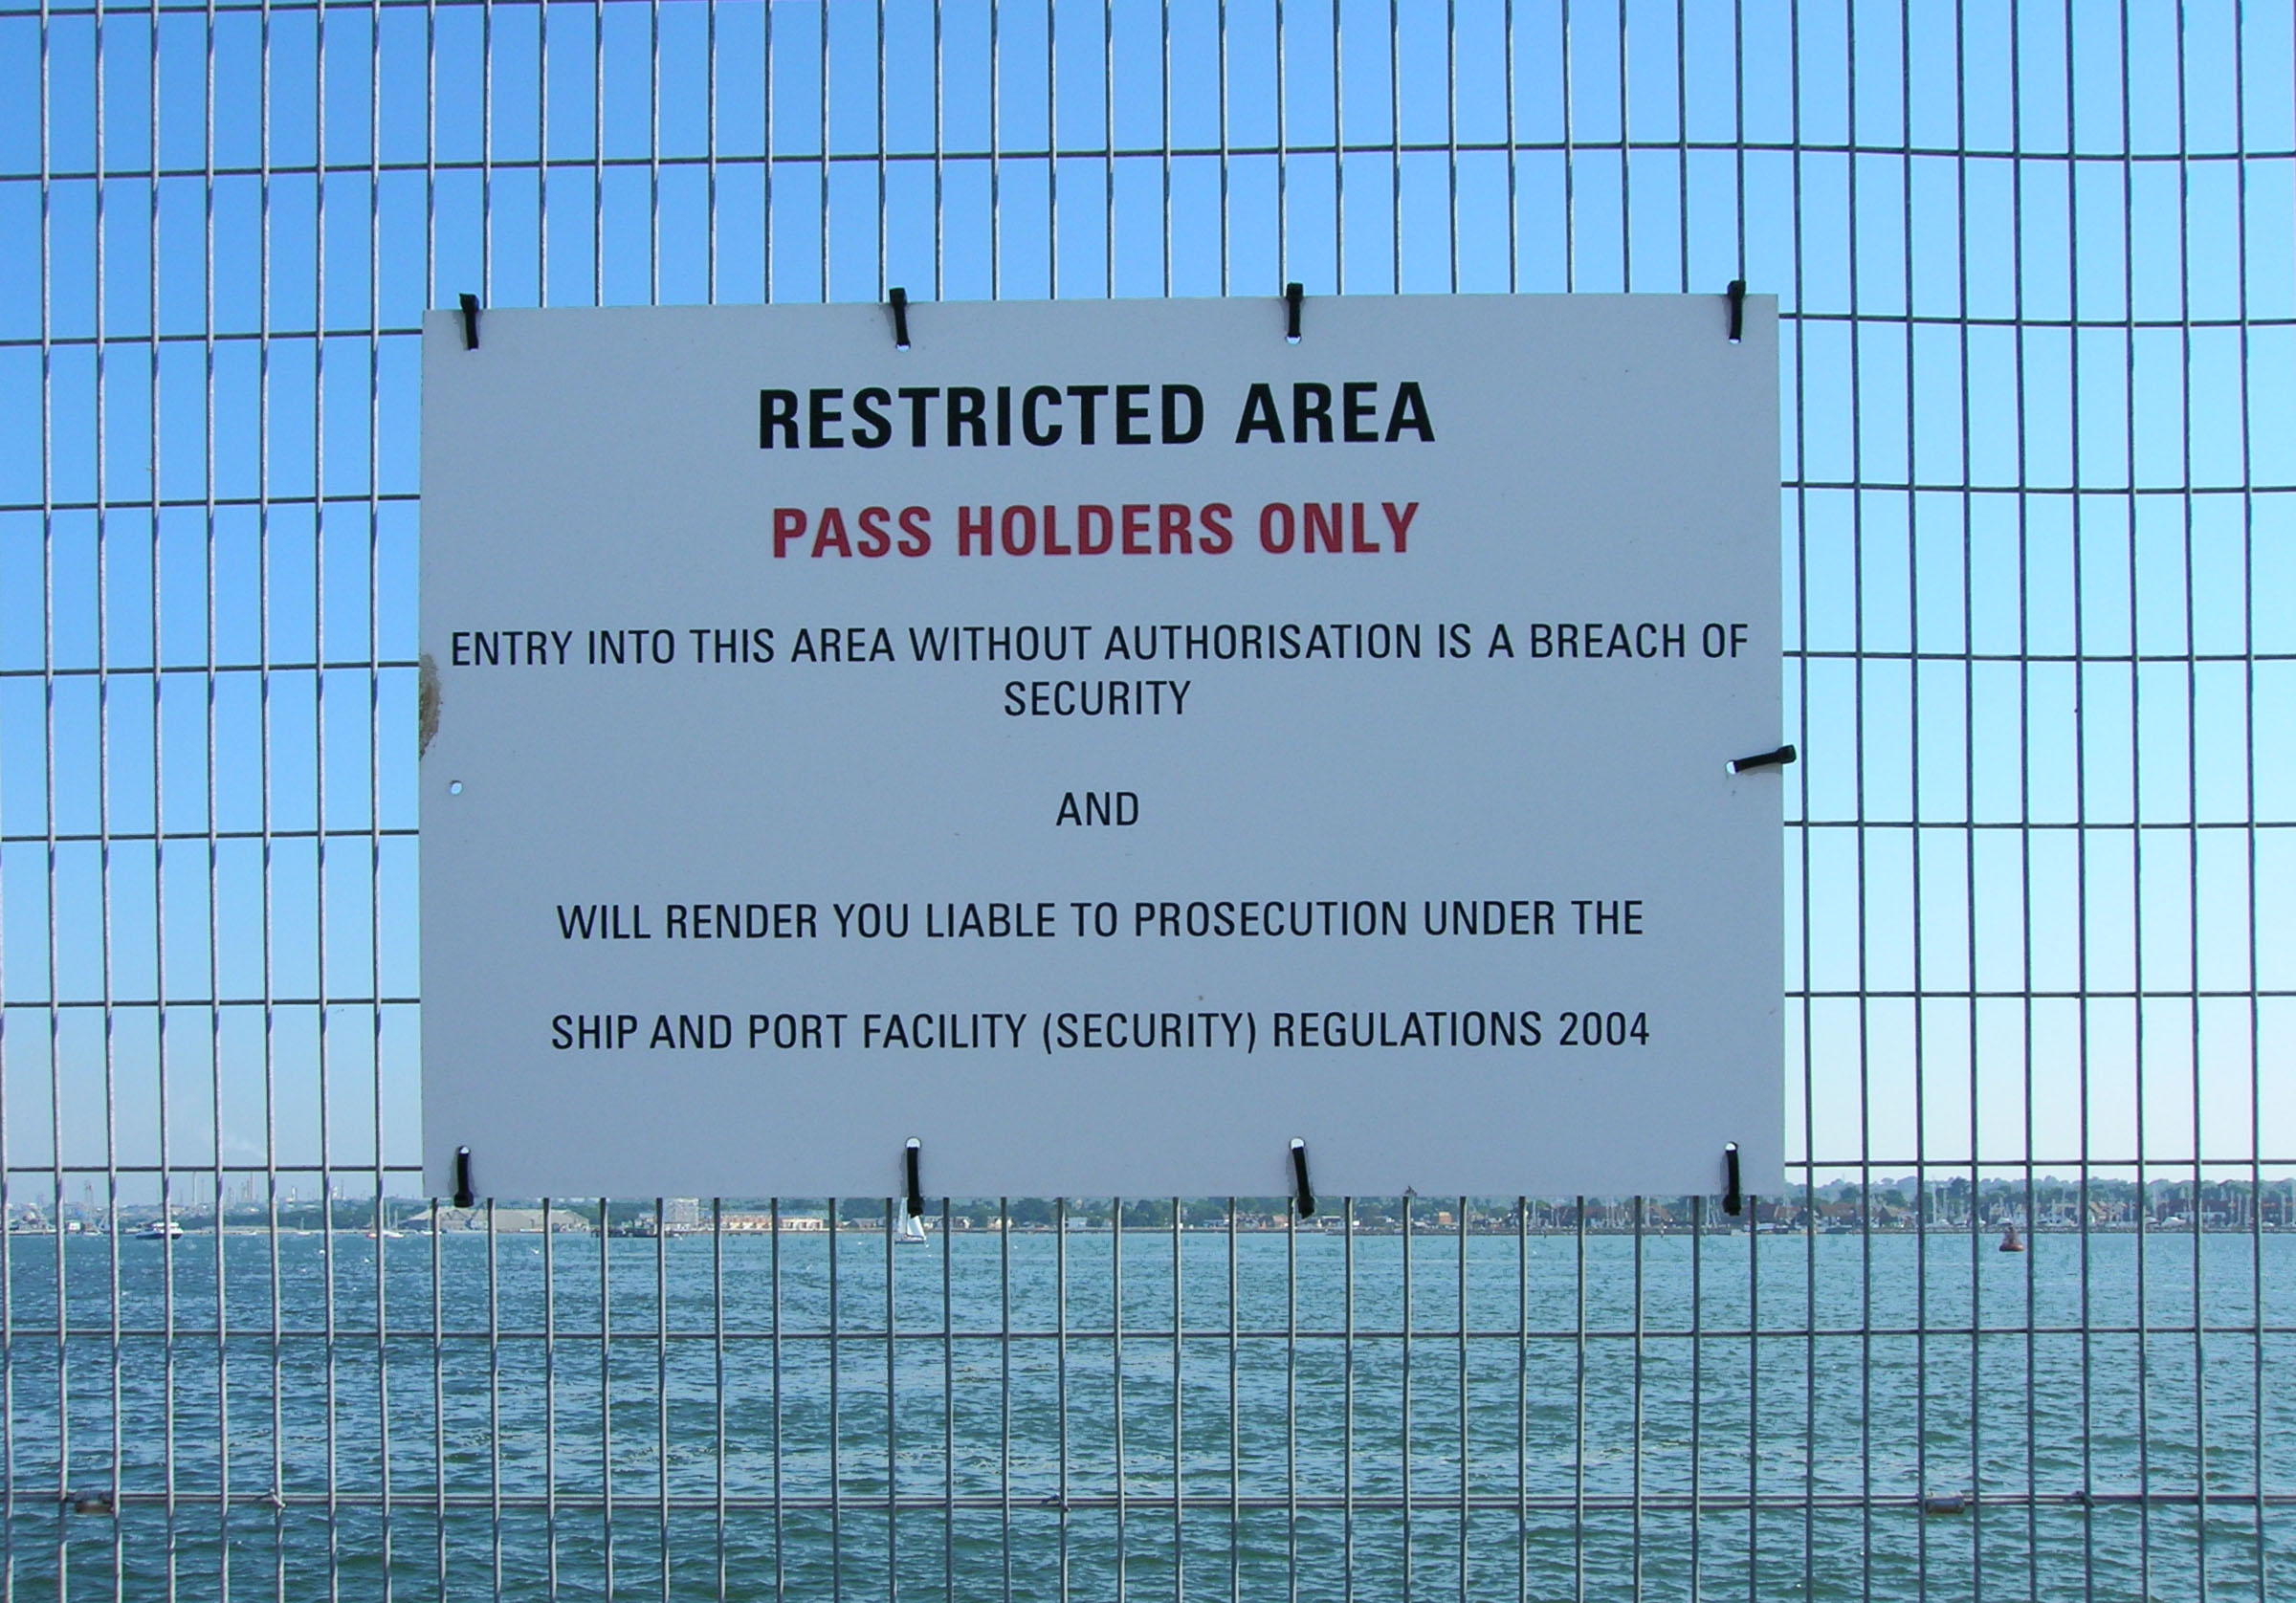 Balancing Security and Community Access: The Impact of ISPS Code on Waterfront of Port Cities